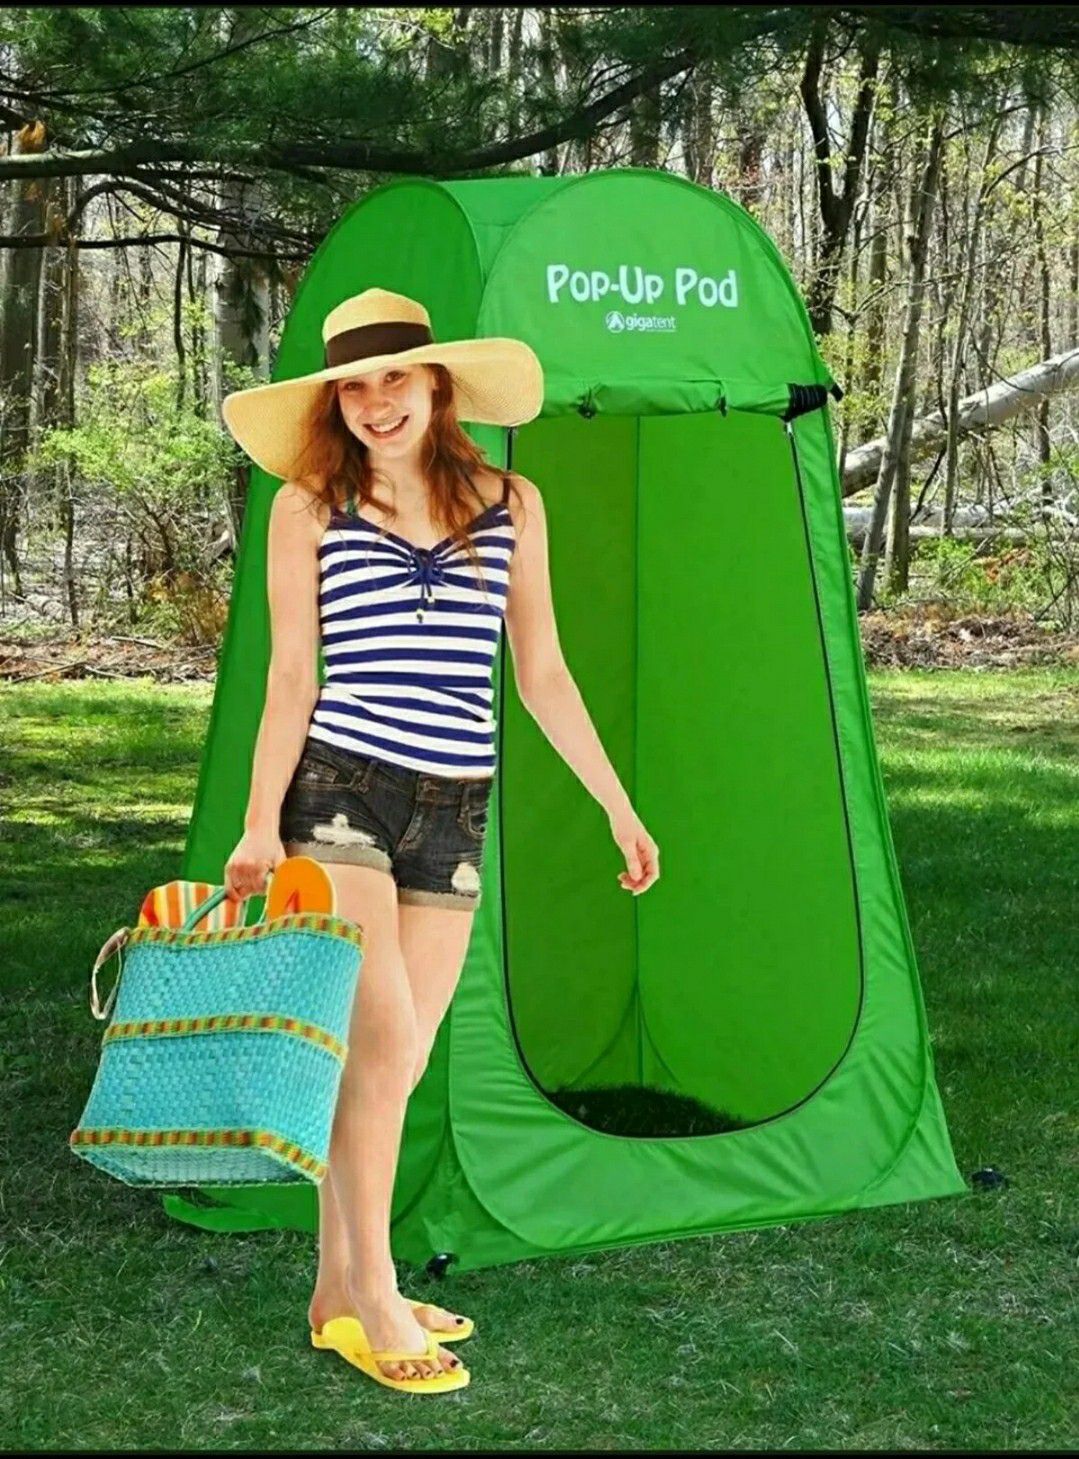 Pop Up Pod Changing Room Privacy Tent